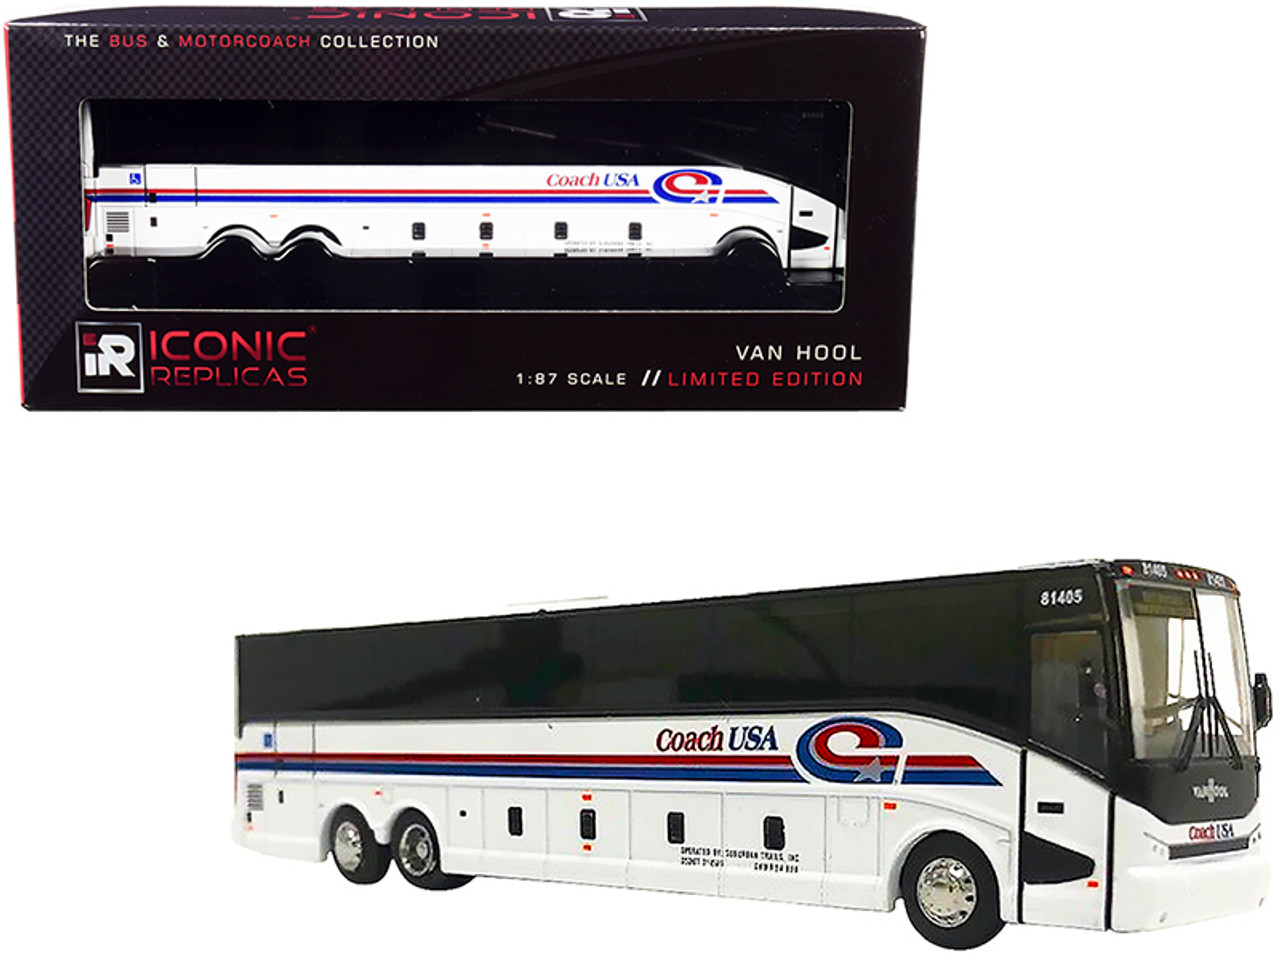 Van Hool CX-45 Bus "Coach U.S.A." (East Brunswick New Jersey) White with Red and Blue Stripes "The Bus & Motorcoach Collection" 1/87 Diecast Model by Iconic Replicas